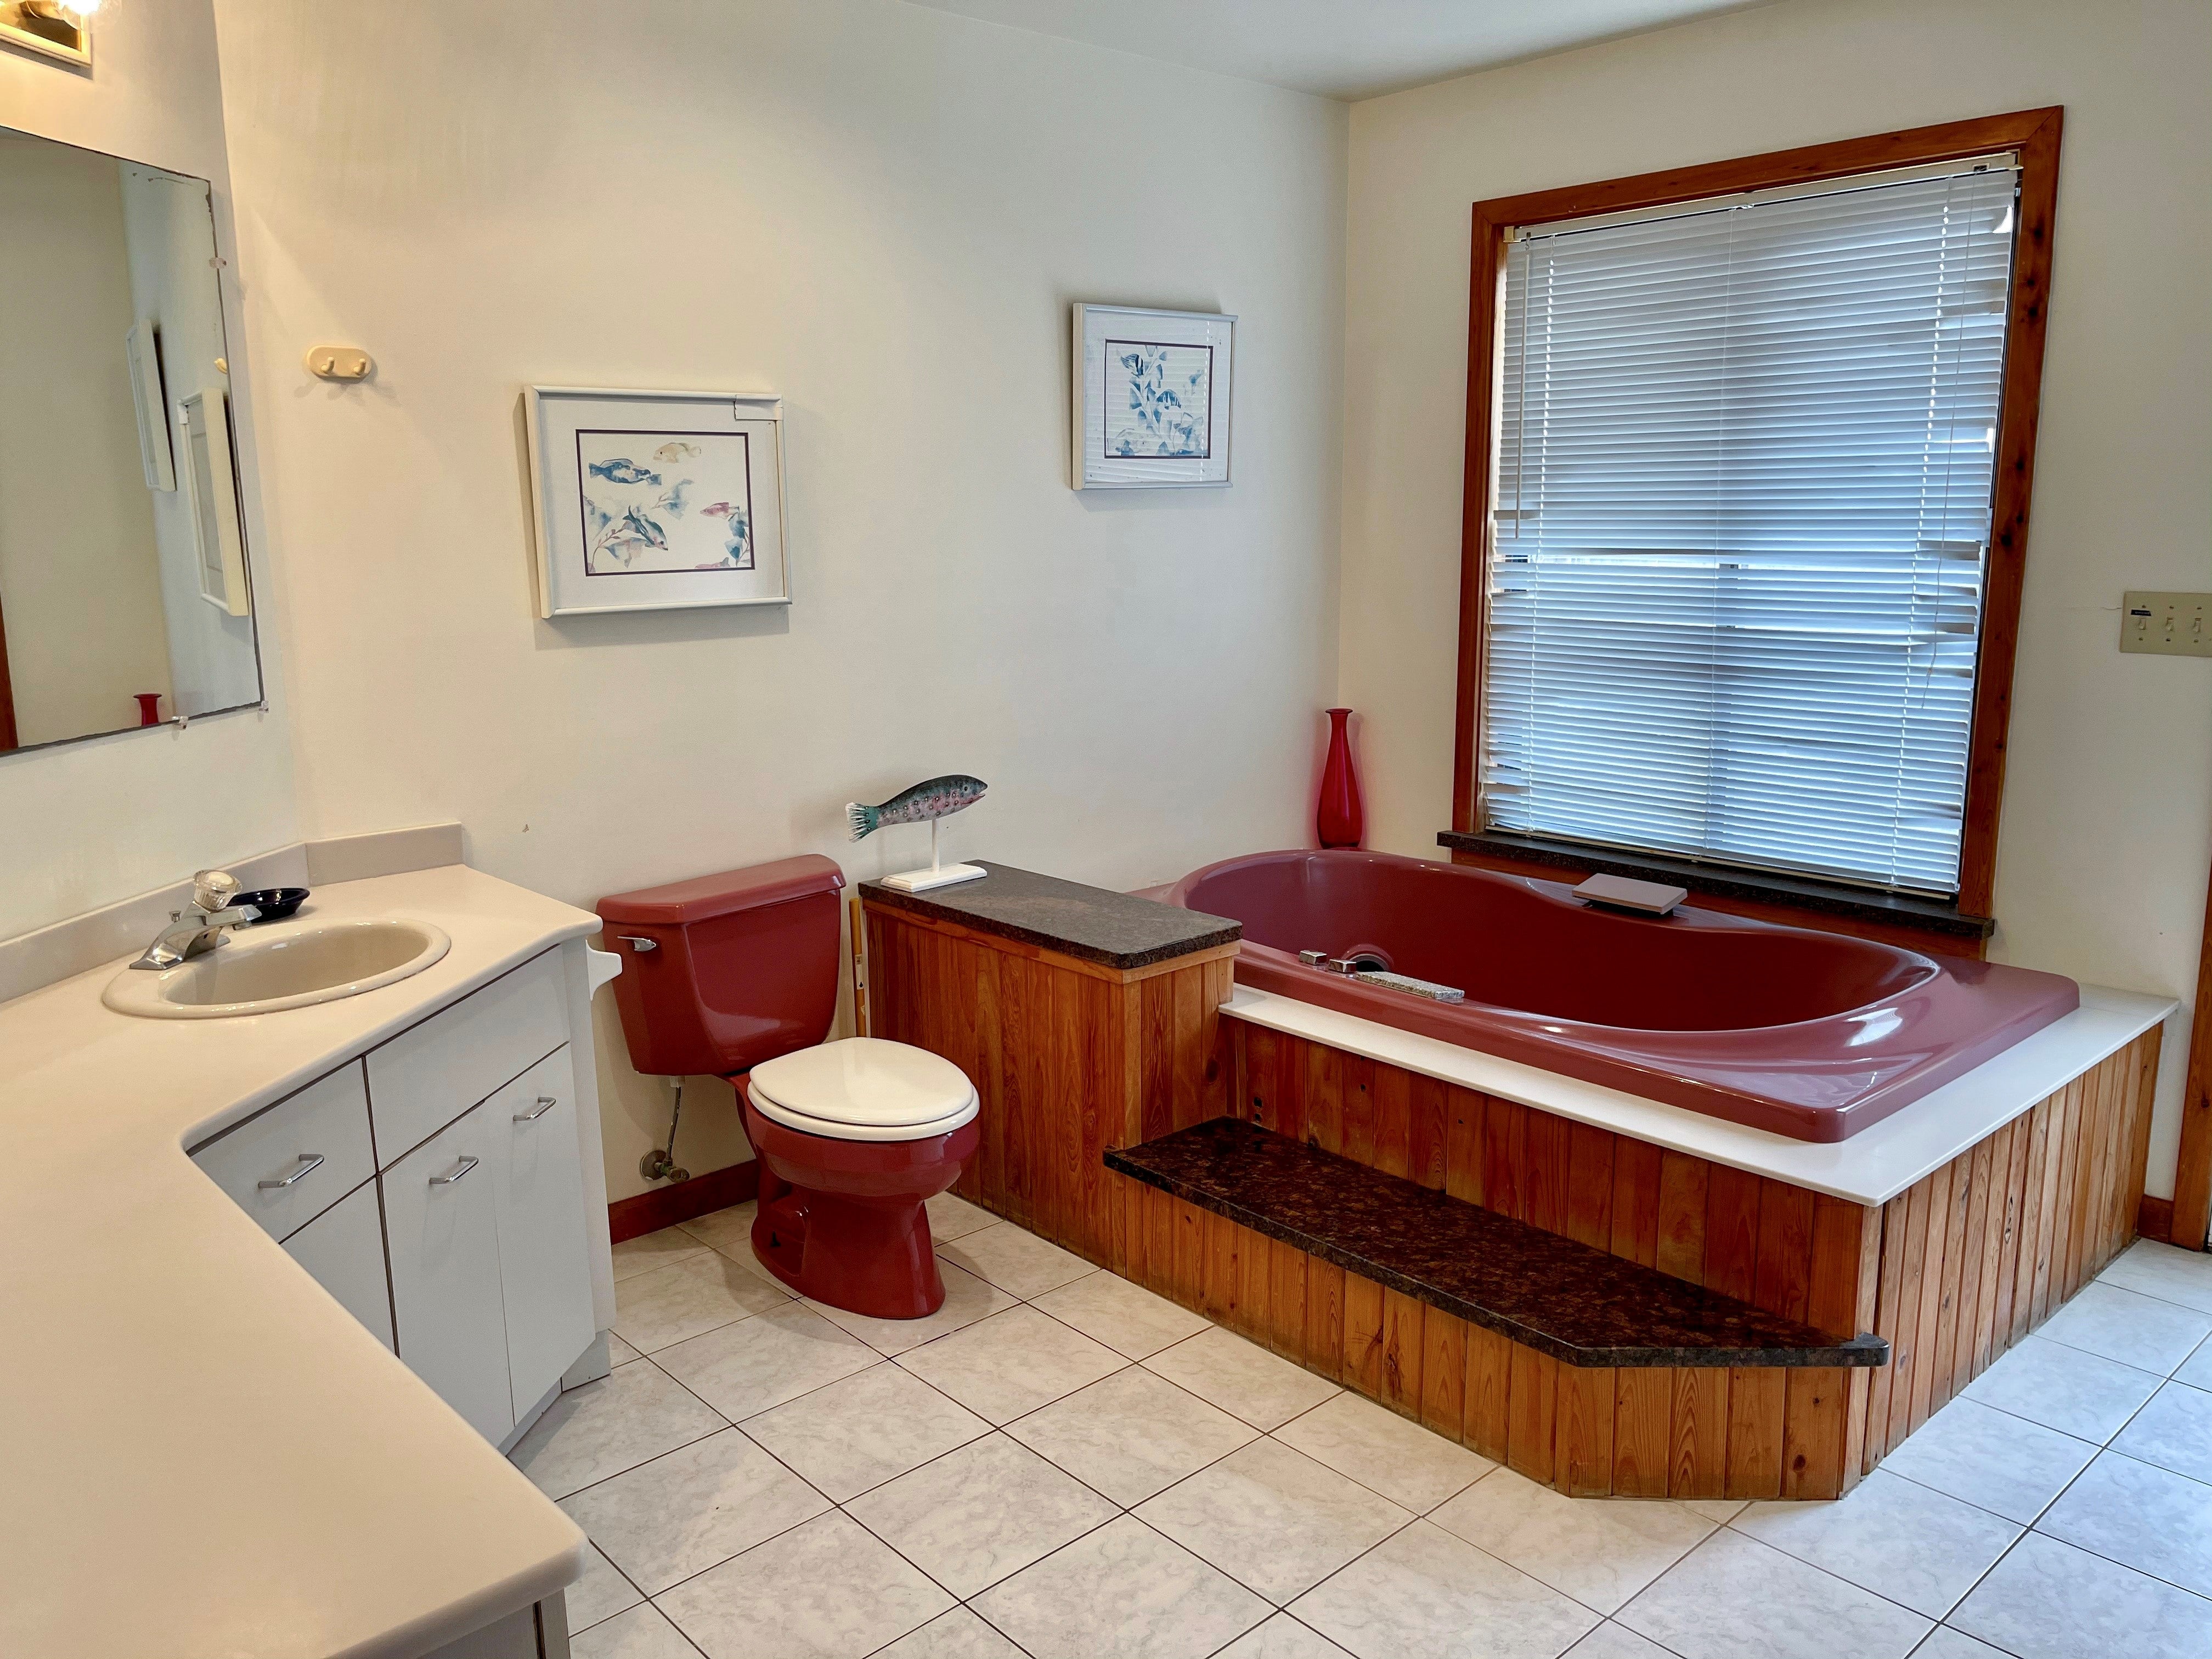 Bath with Whirlpool Tub and Separate Shower, First Floor